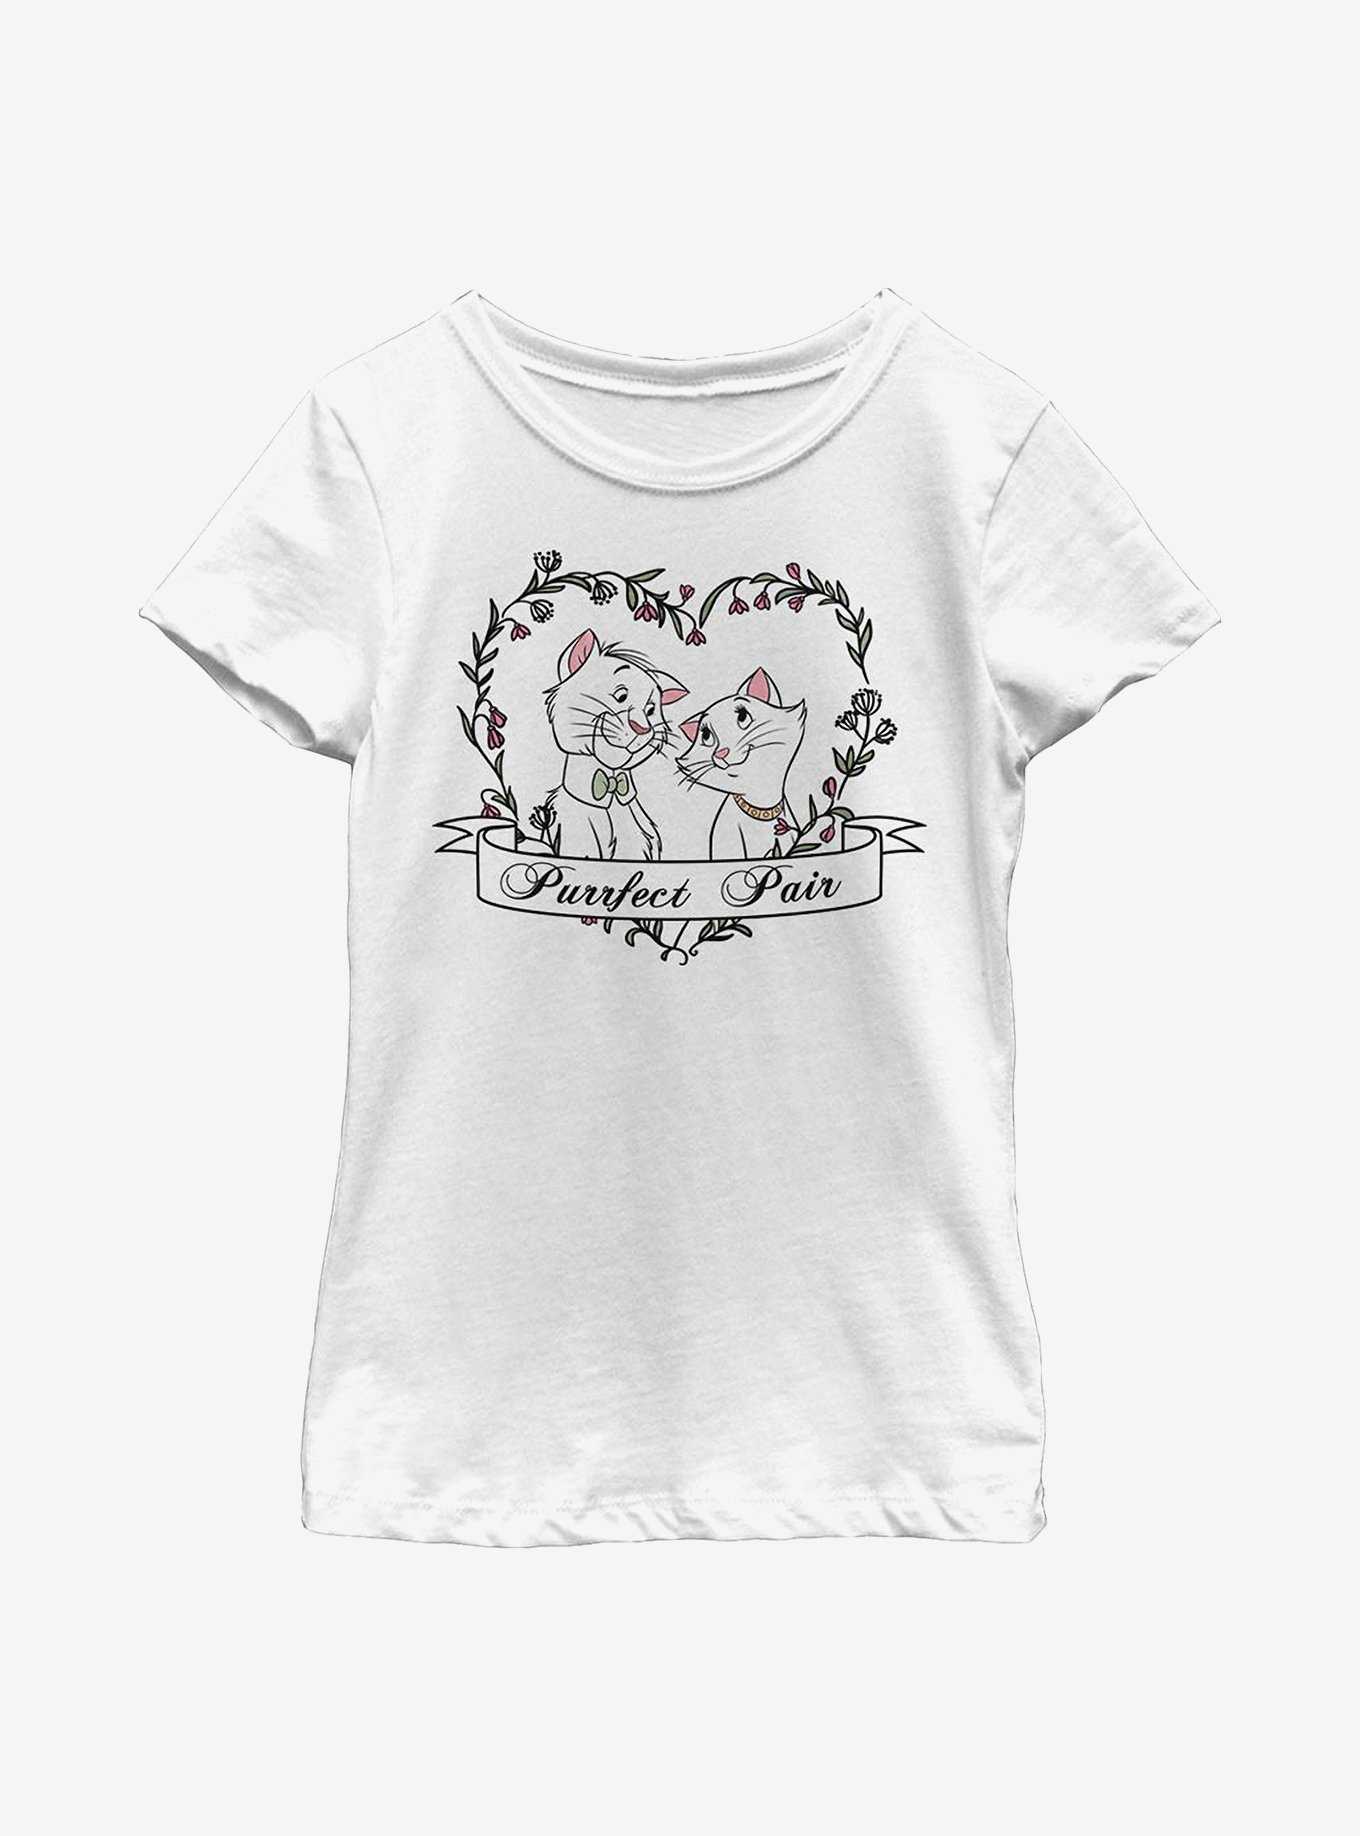 Disney The Aristocats Duchess And O'Malley Purrfect Youth Girls T-Shirt, , hi-res